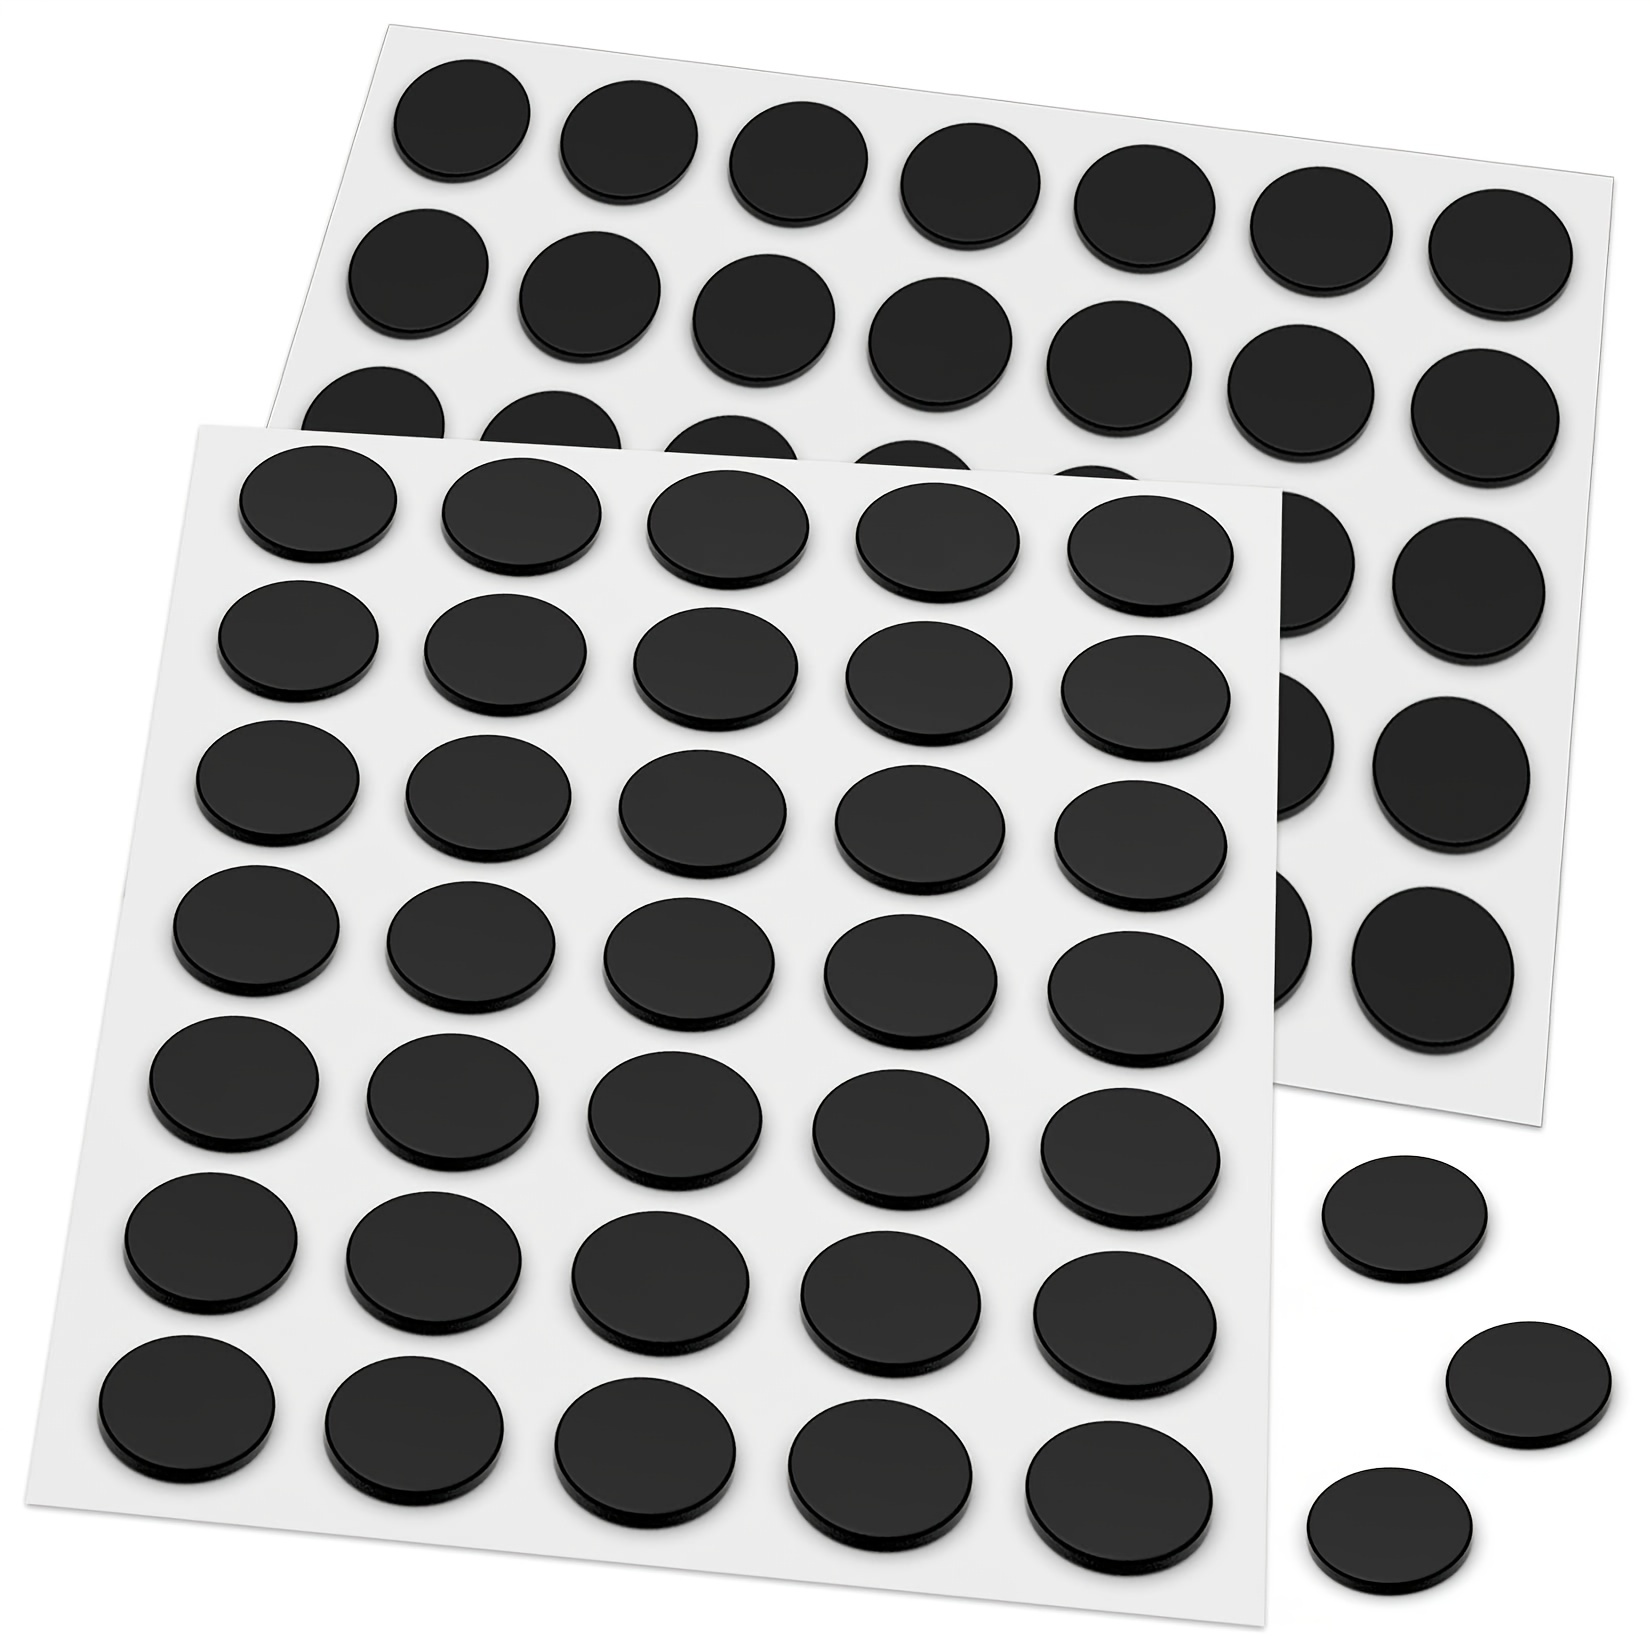  Round Magnets with Adhesive Backing - 120 PCs Flexible Self  Adhesive Magnets for Crafts - Small Sticky Magnetic Dots are Alternative to  Magnetic Tape, Strip and Stickers : Office Products